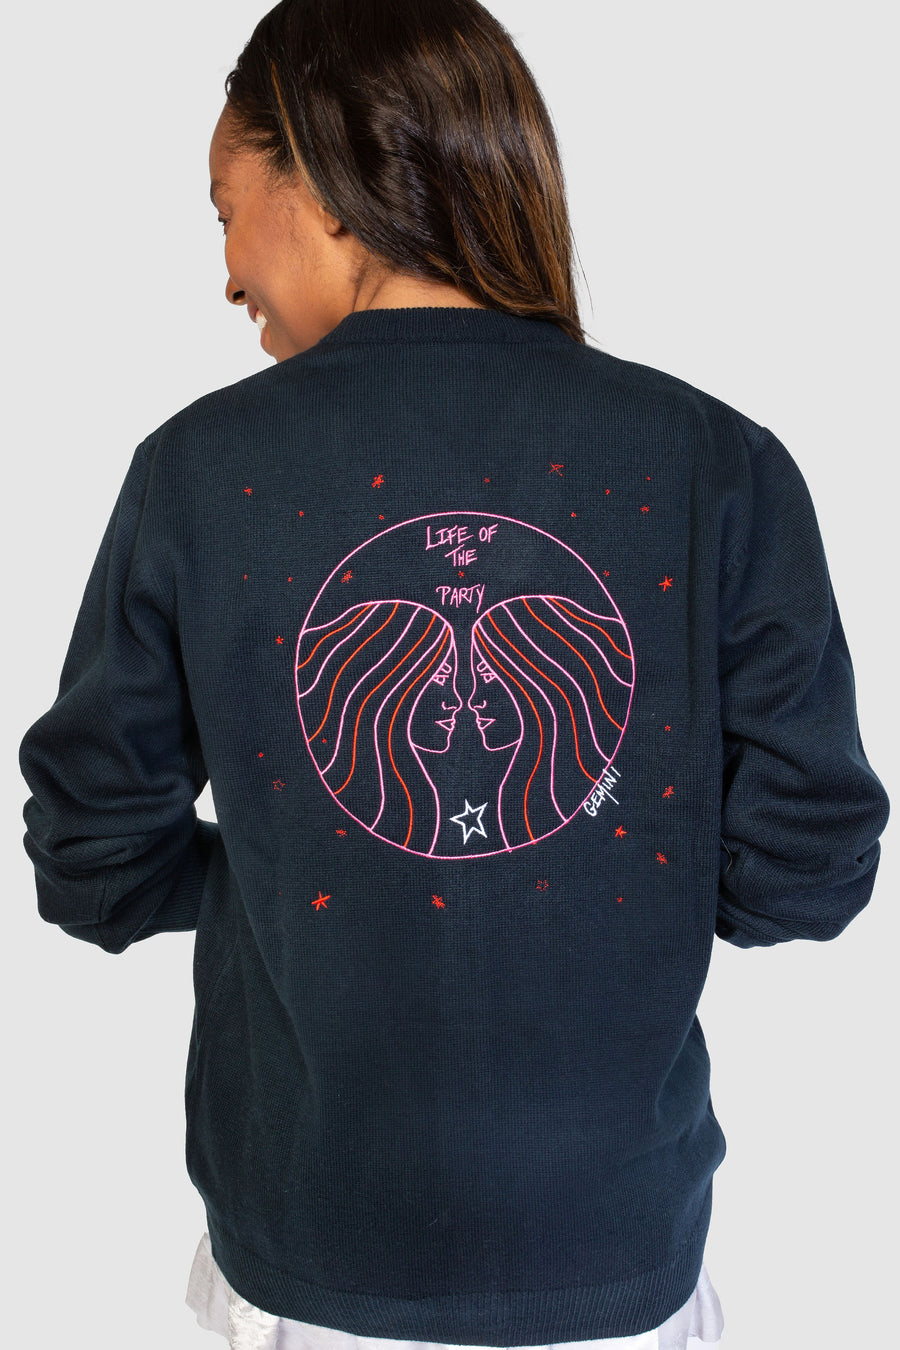 Luna Cardigan Pick Your Sign *Limited*Edition*